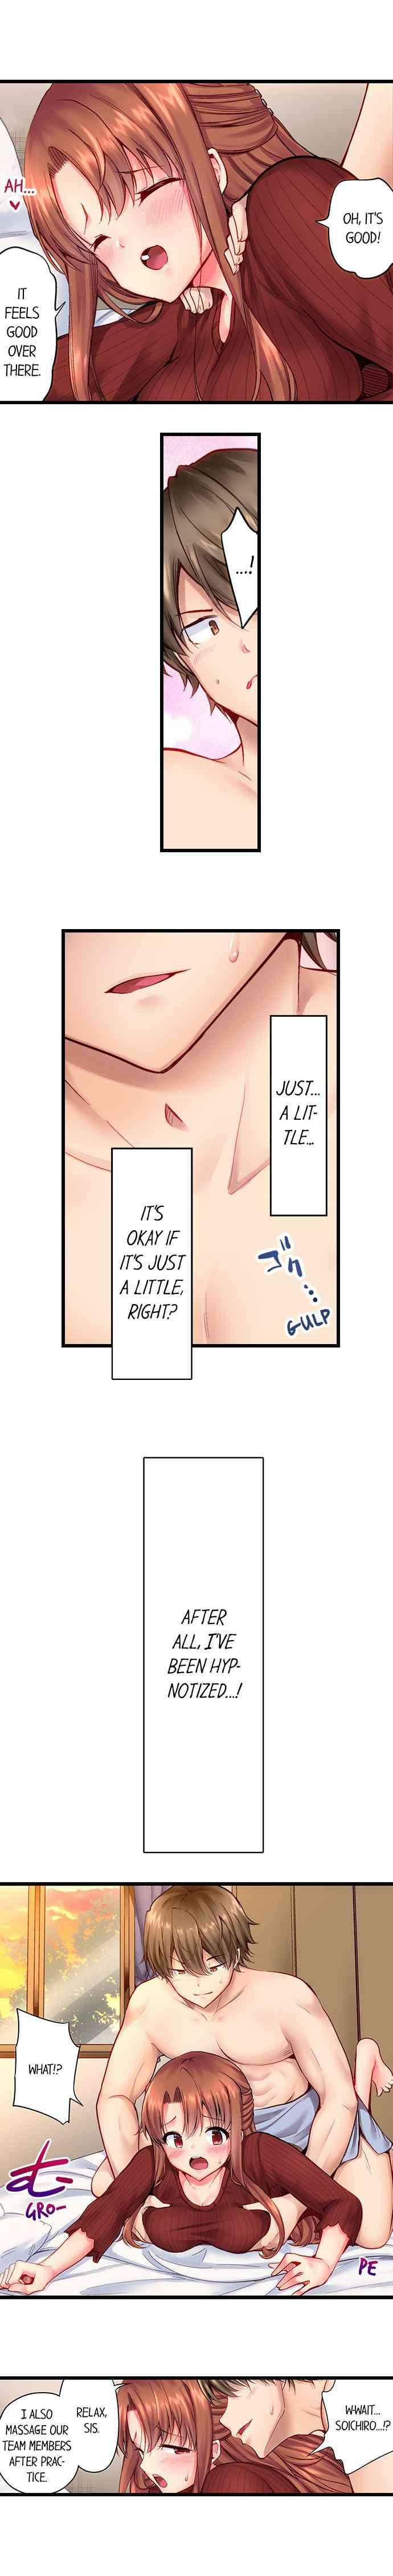 [Yuuki HB] "Hypnotized" Sex with My Brother Ch.21/? [English] [Ongoing] 14